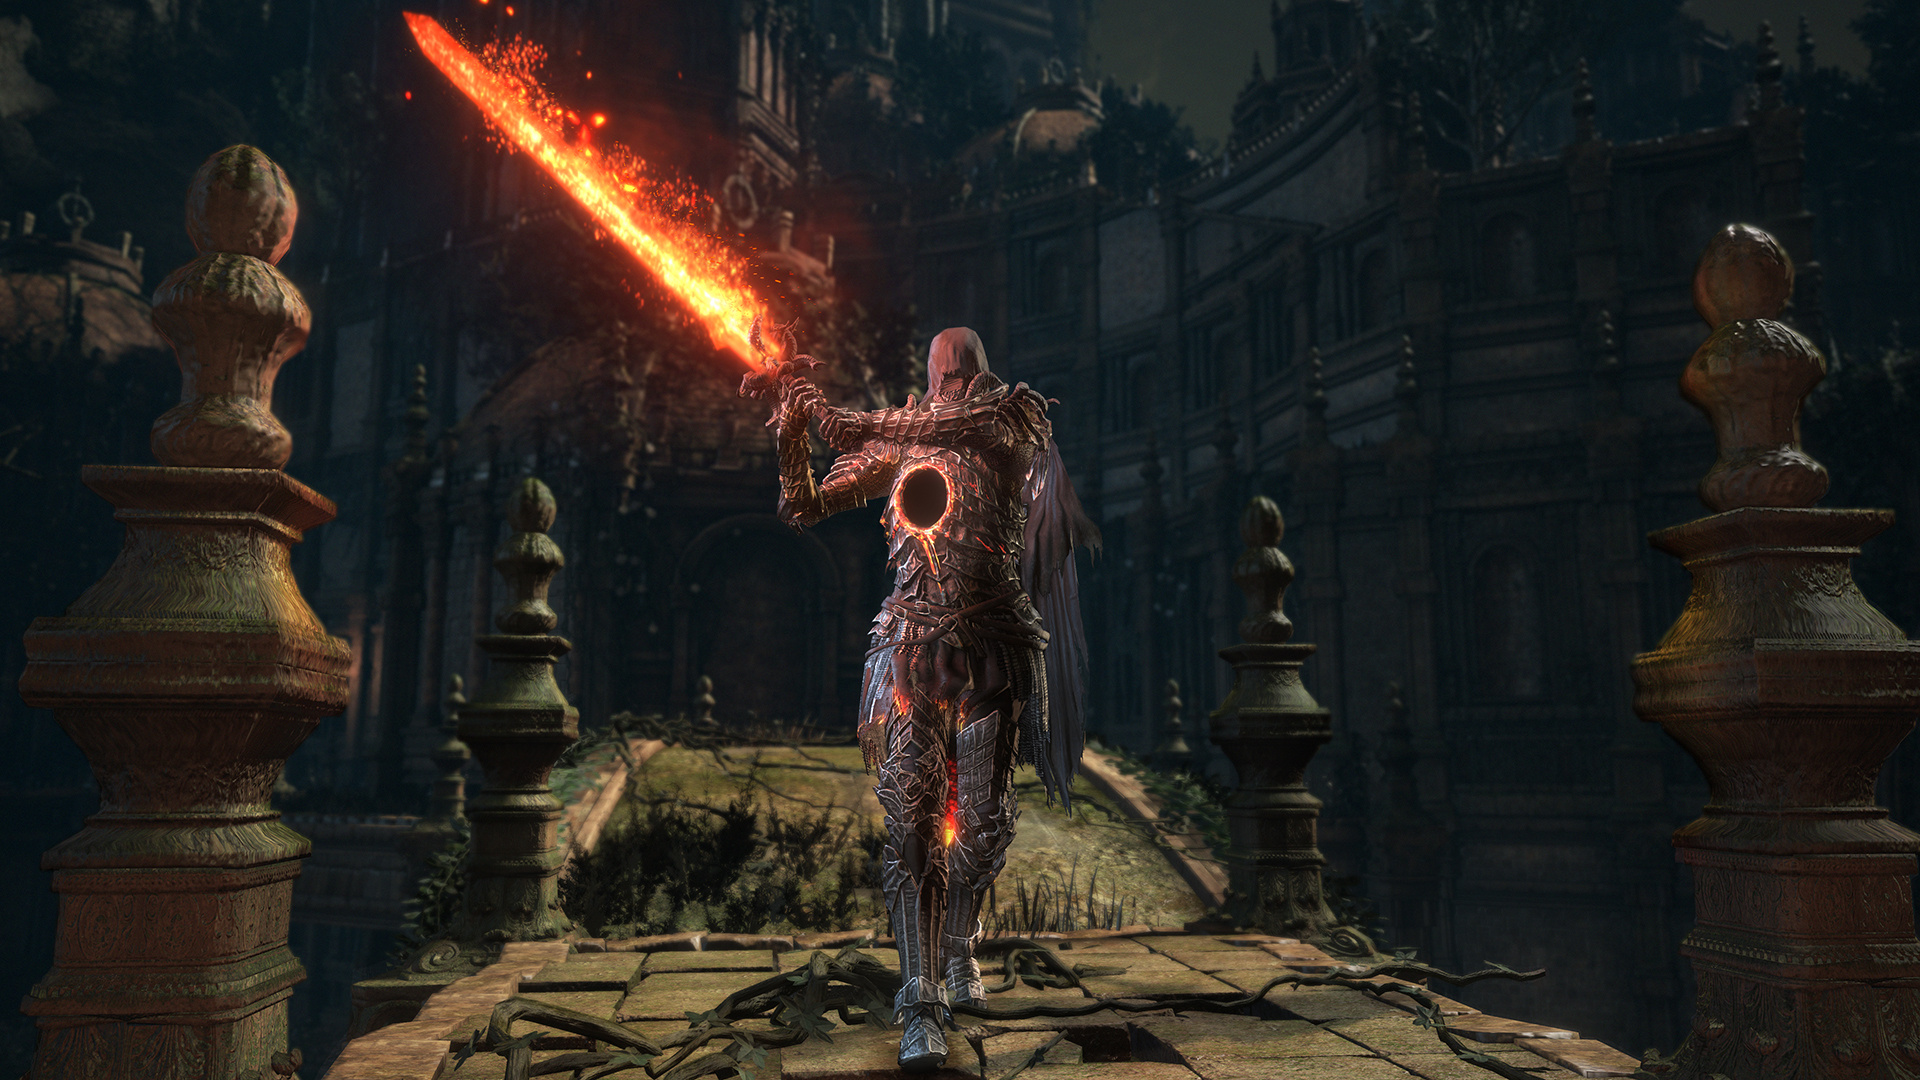 This Dark Souls 3 Mod Punishes You For Standing Still